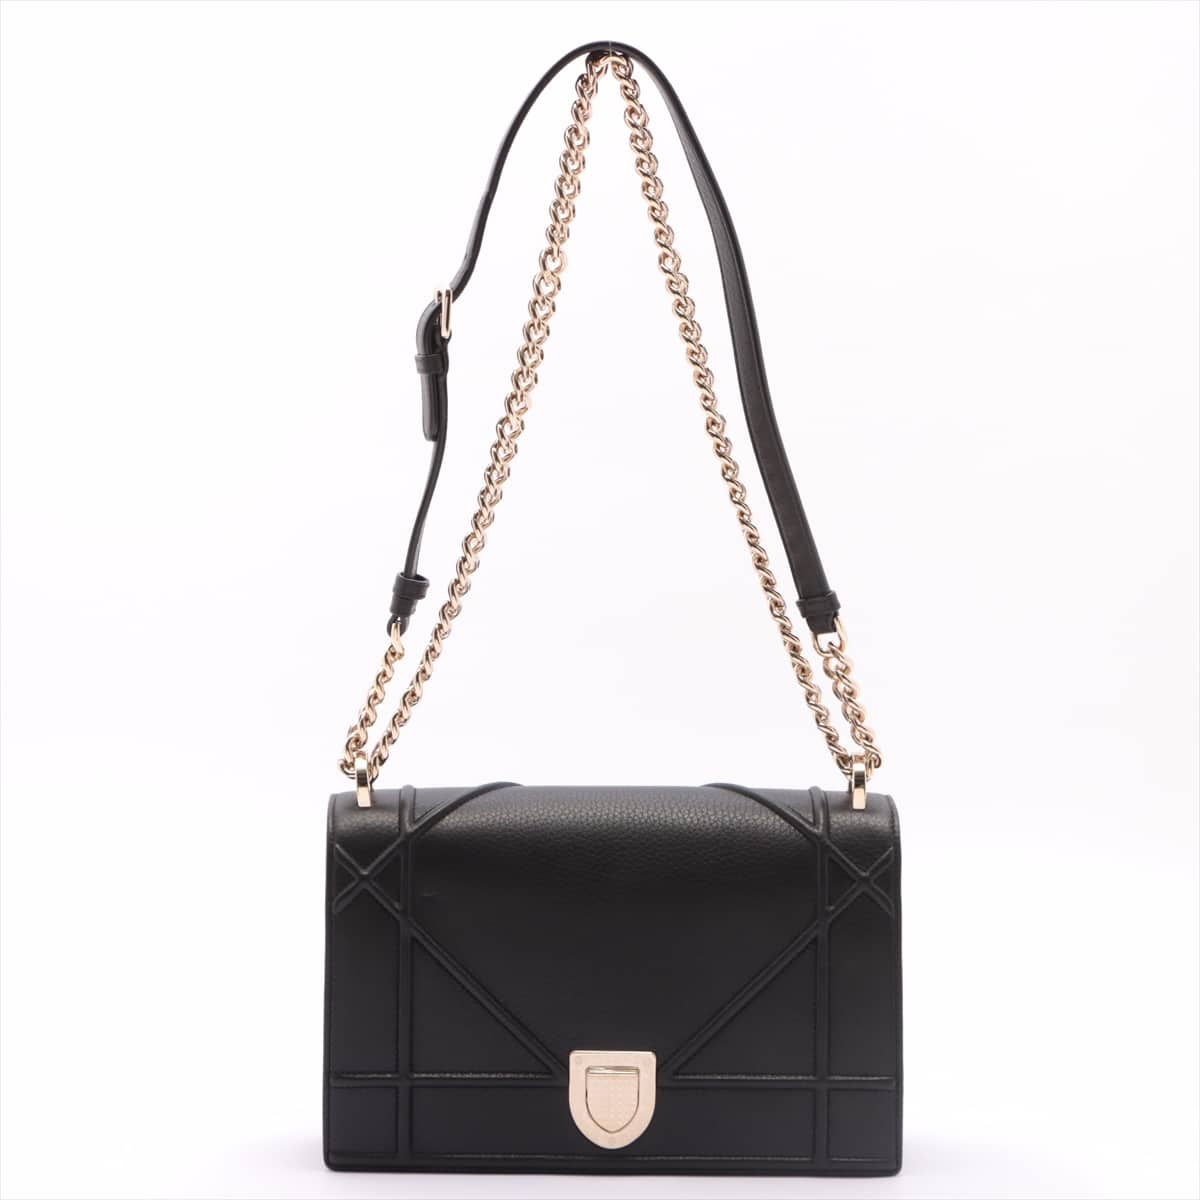 Christian Dior Diorama Leather Chain shoulder bag Black open papers